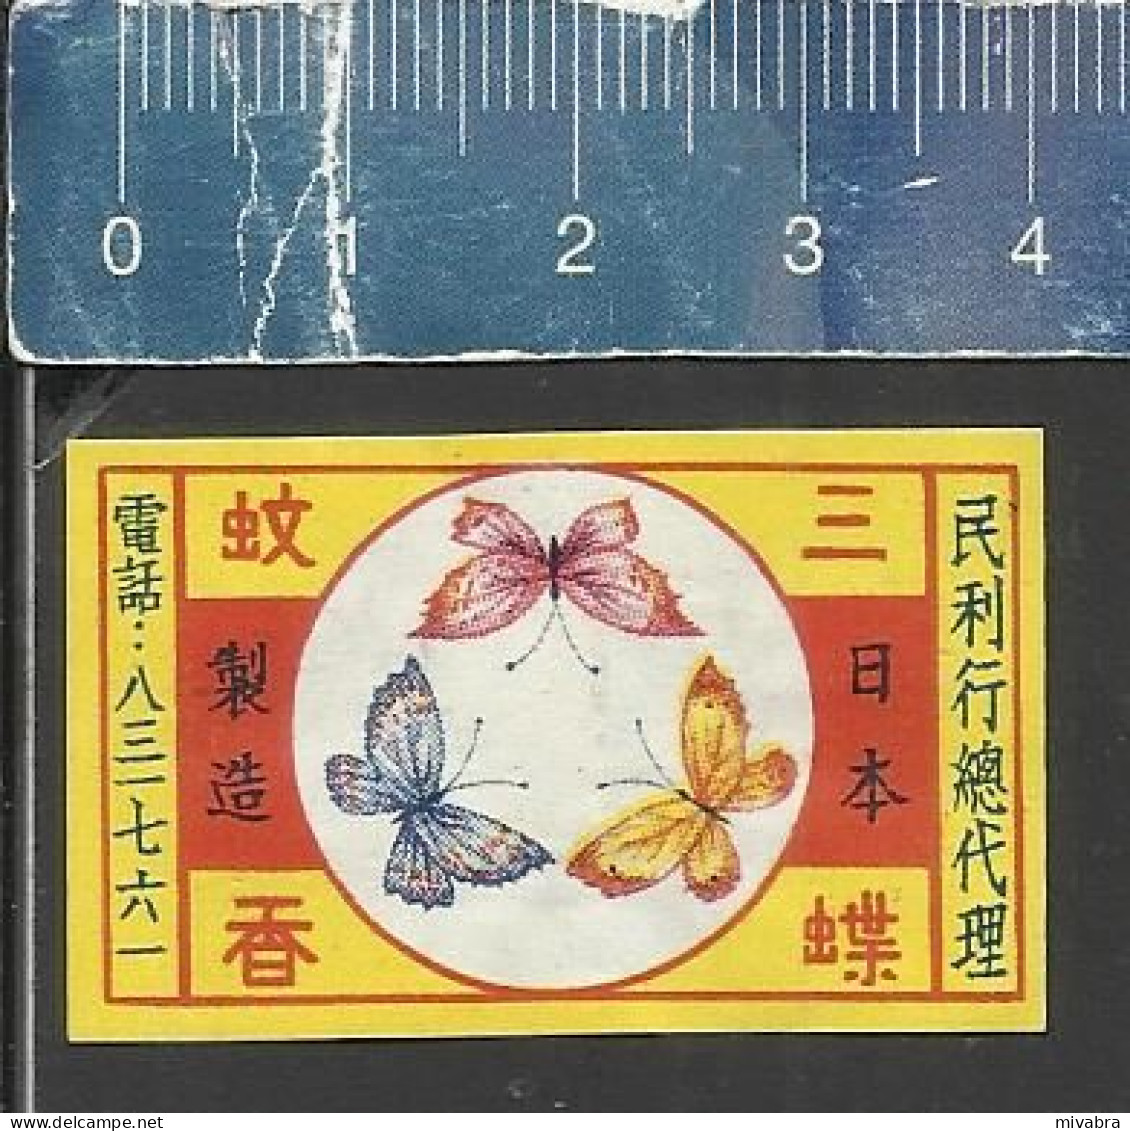 BUTTERFLIES ( BUTTERFLY VLINDERS PAPILLONS ) OLD VINTAGE SMALL MATCHBOX LABEL MADE IN CHINA - Matchbox Labels